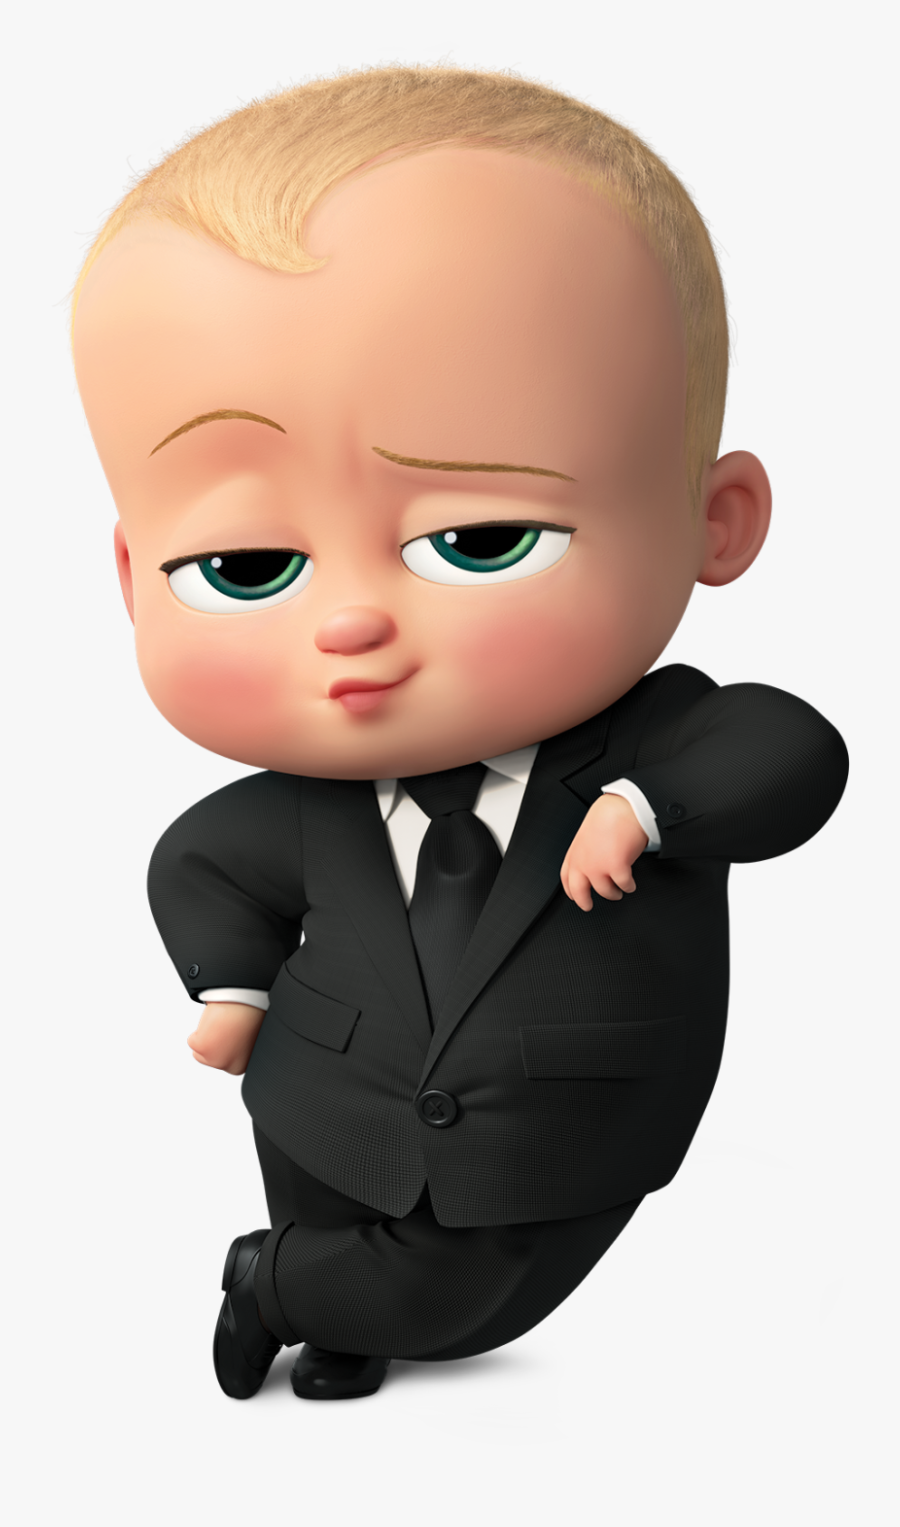 Boss Baby Clipart Poderoso - Baby Boss Images Hd, Transparent Clipart